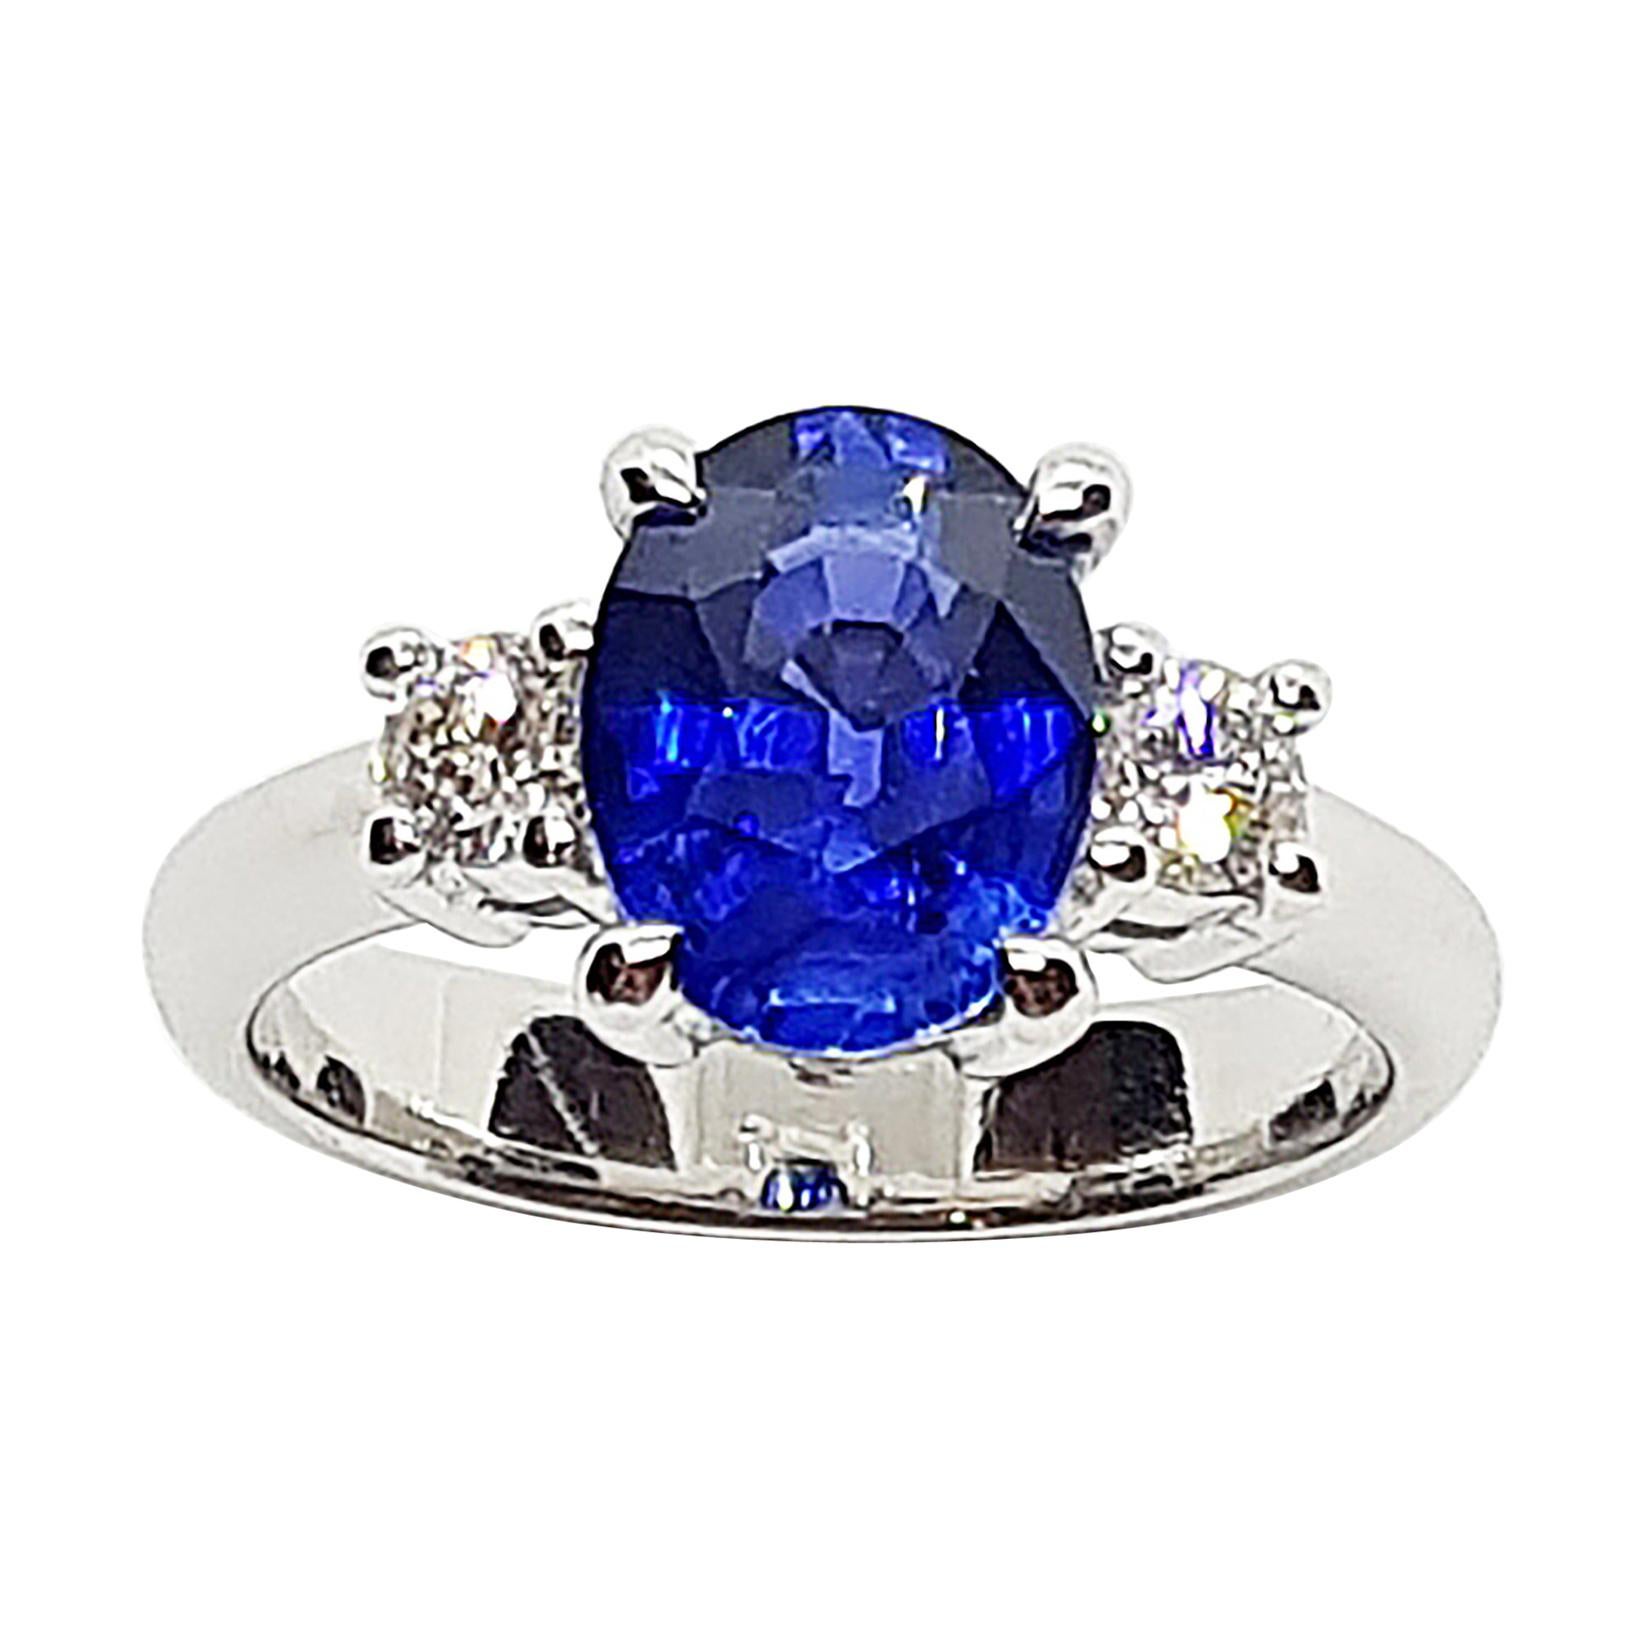 Certified Royal Blue Sapphire with Diamond Ring Set in Platinum 950 Settings For Sale